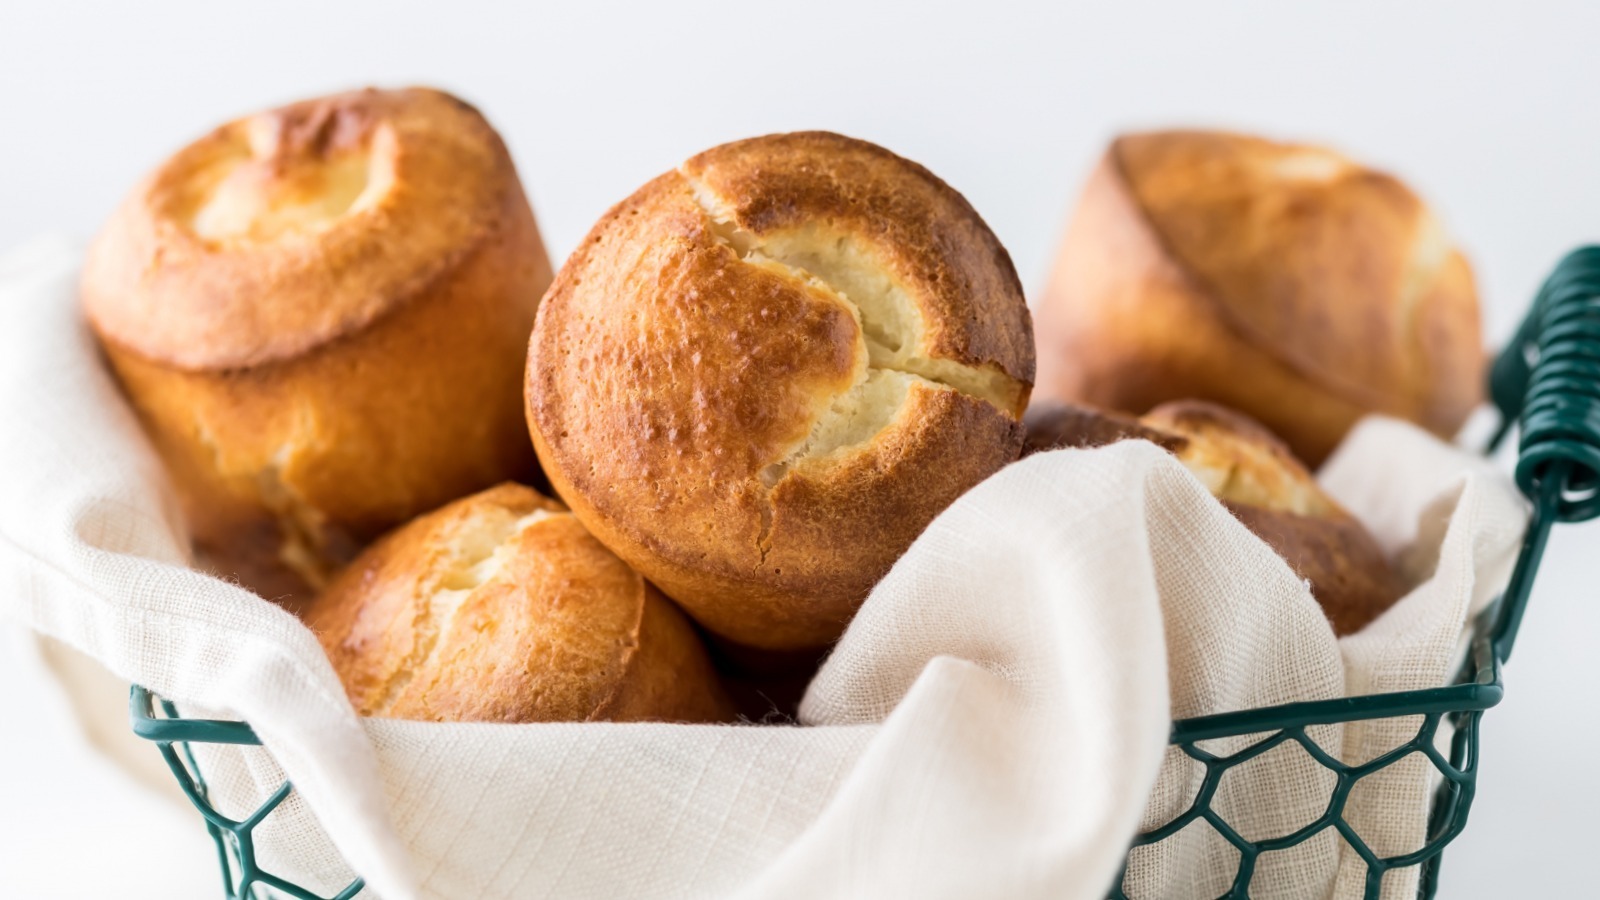 https://www.mashed.com/img/gallery/do-you-have-to-preheat-the-pan-when-making-popovers/l-intro-1675091767.jpg